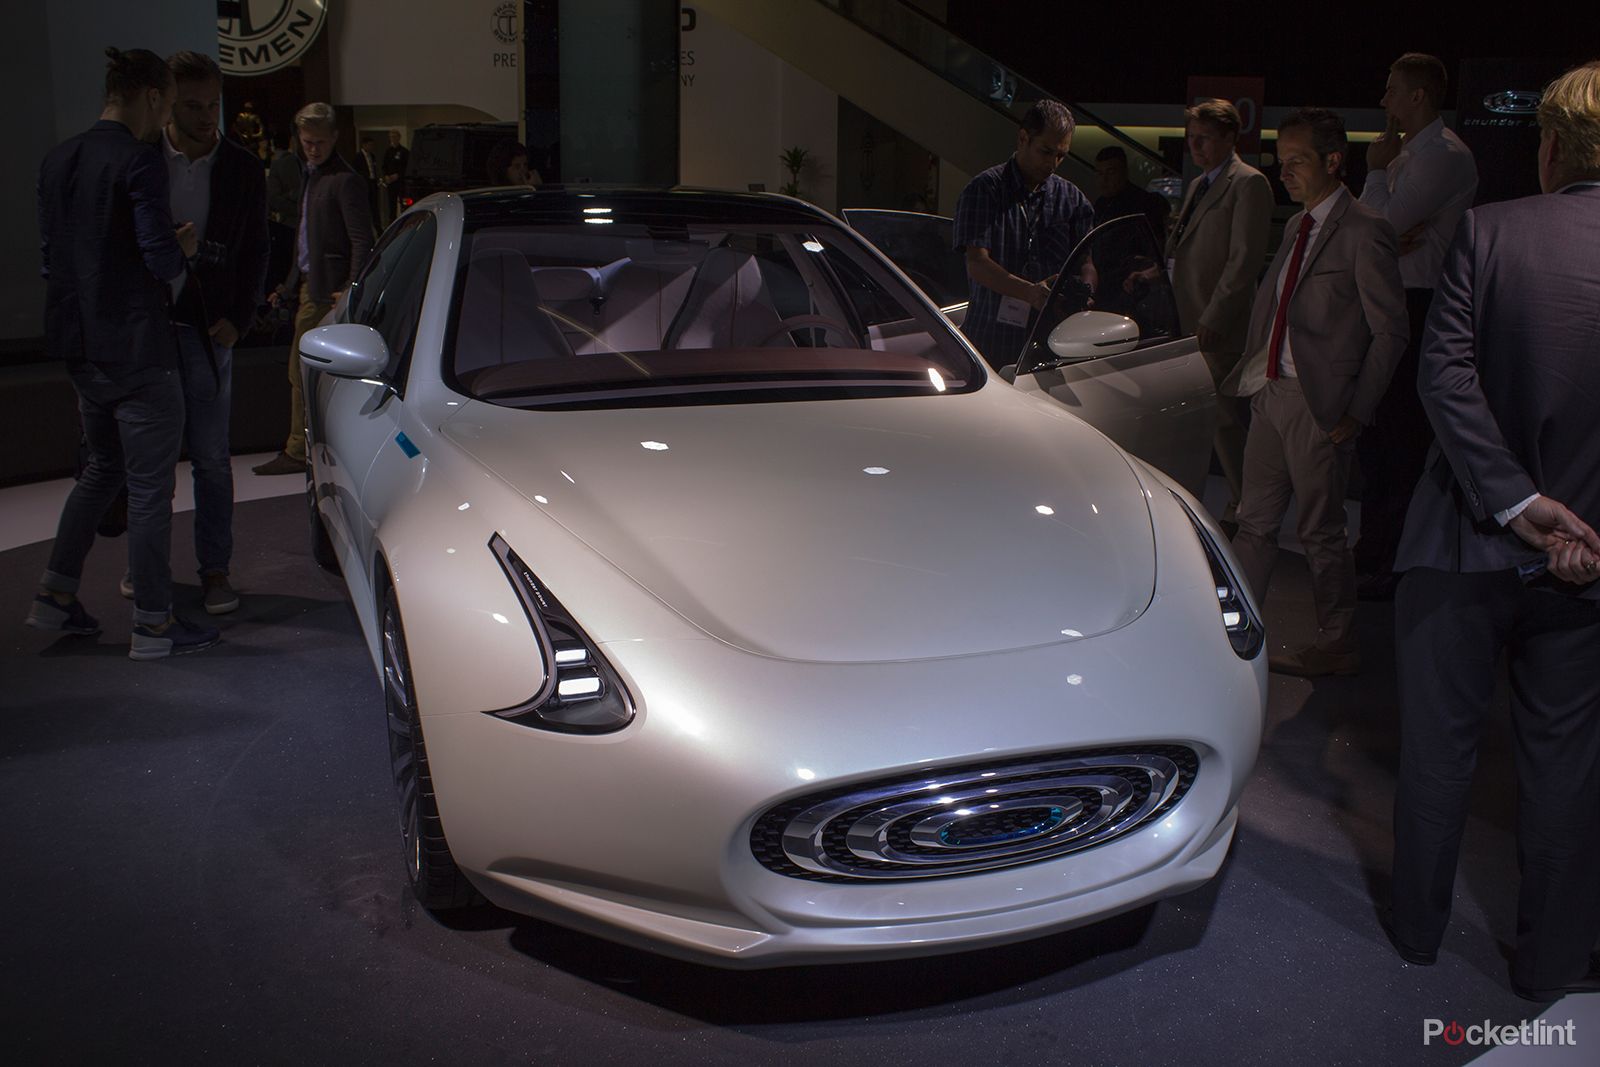 thunder power sedan ev 400 mile range fast charging tesla quick and features the future of interiors image 1